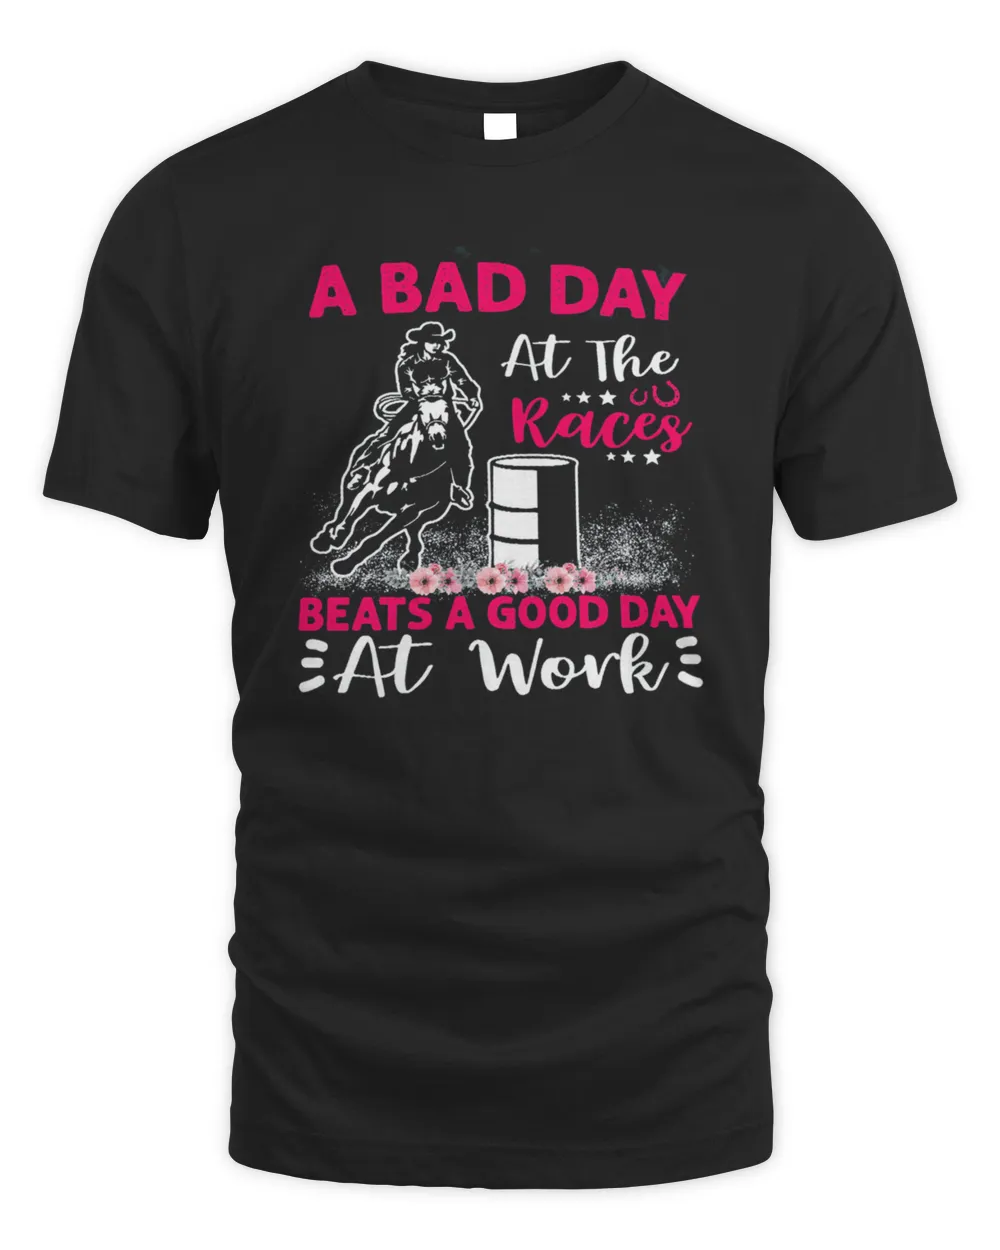 A Bad Day A T The Races Beats A Good Day At Work Shirt